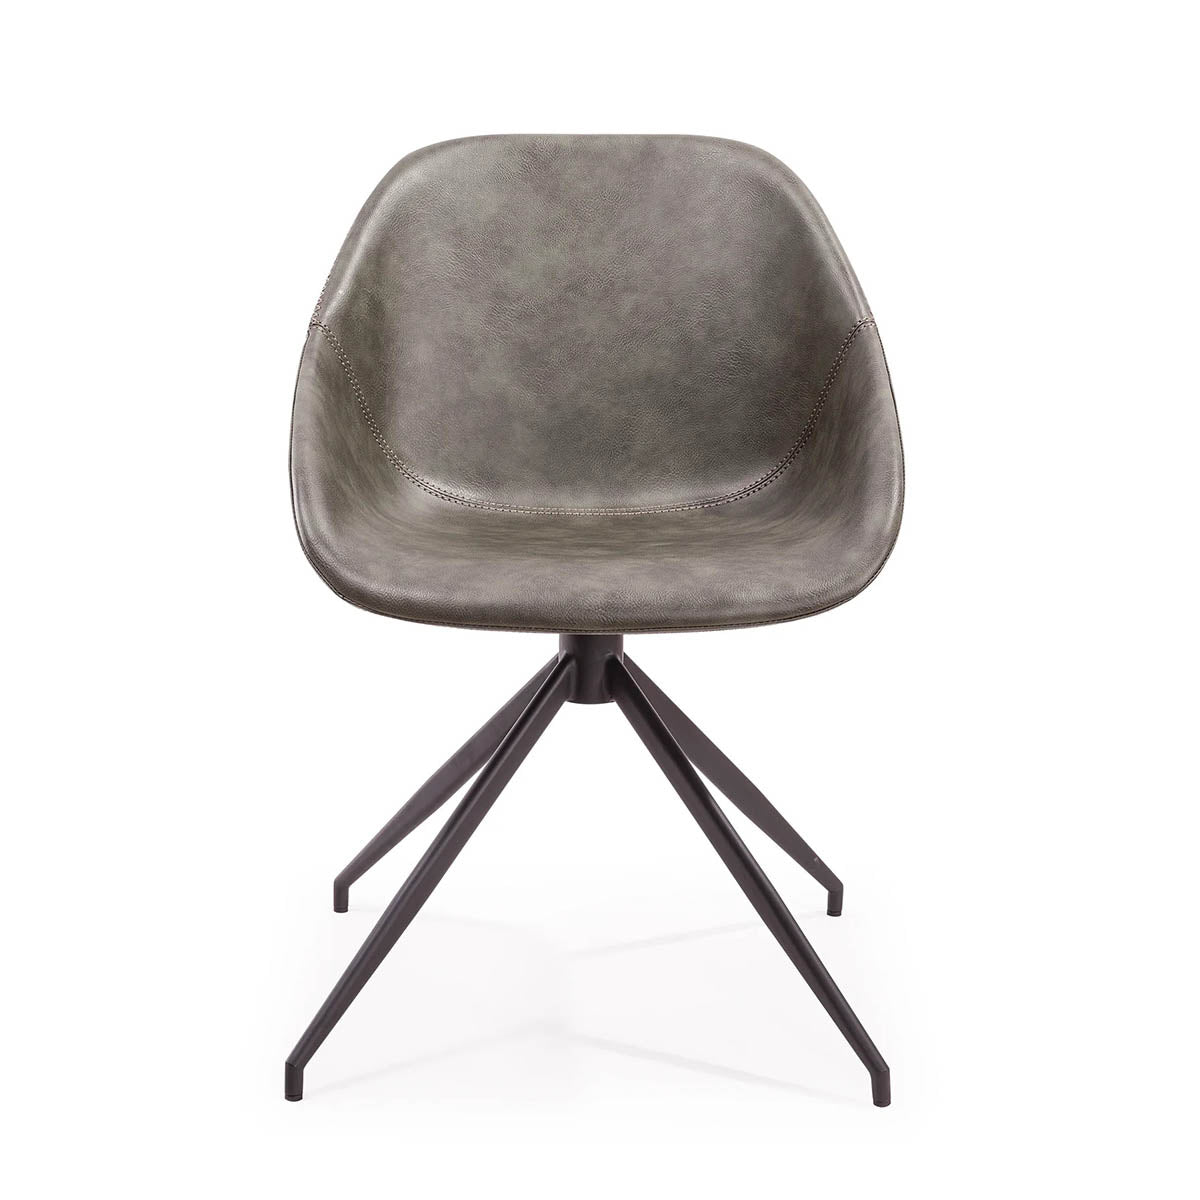 Lansel Swivel Dining Chair (Olive Green Leather).